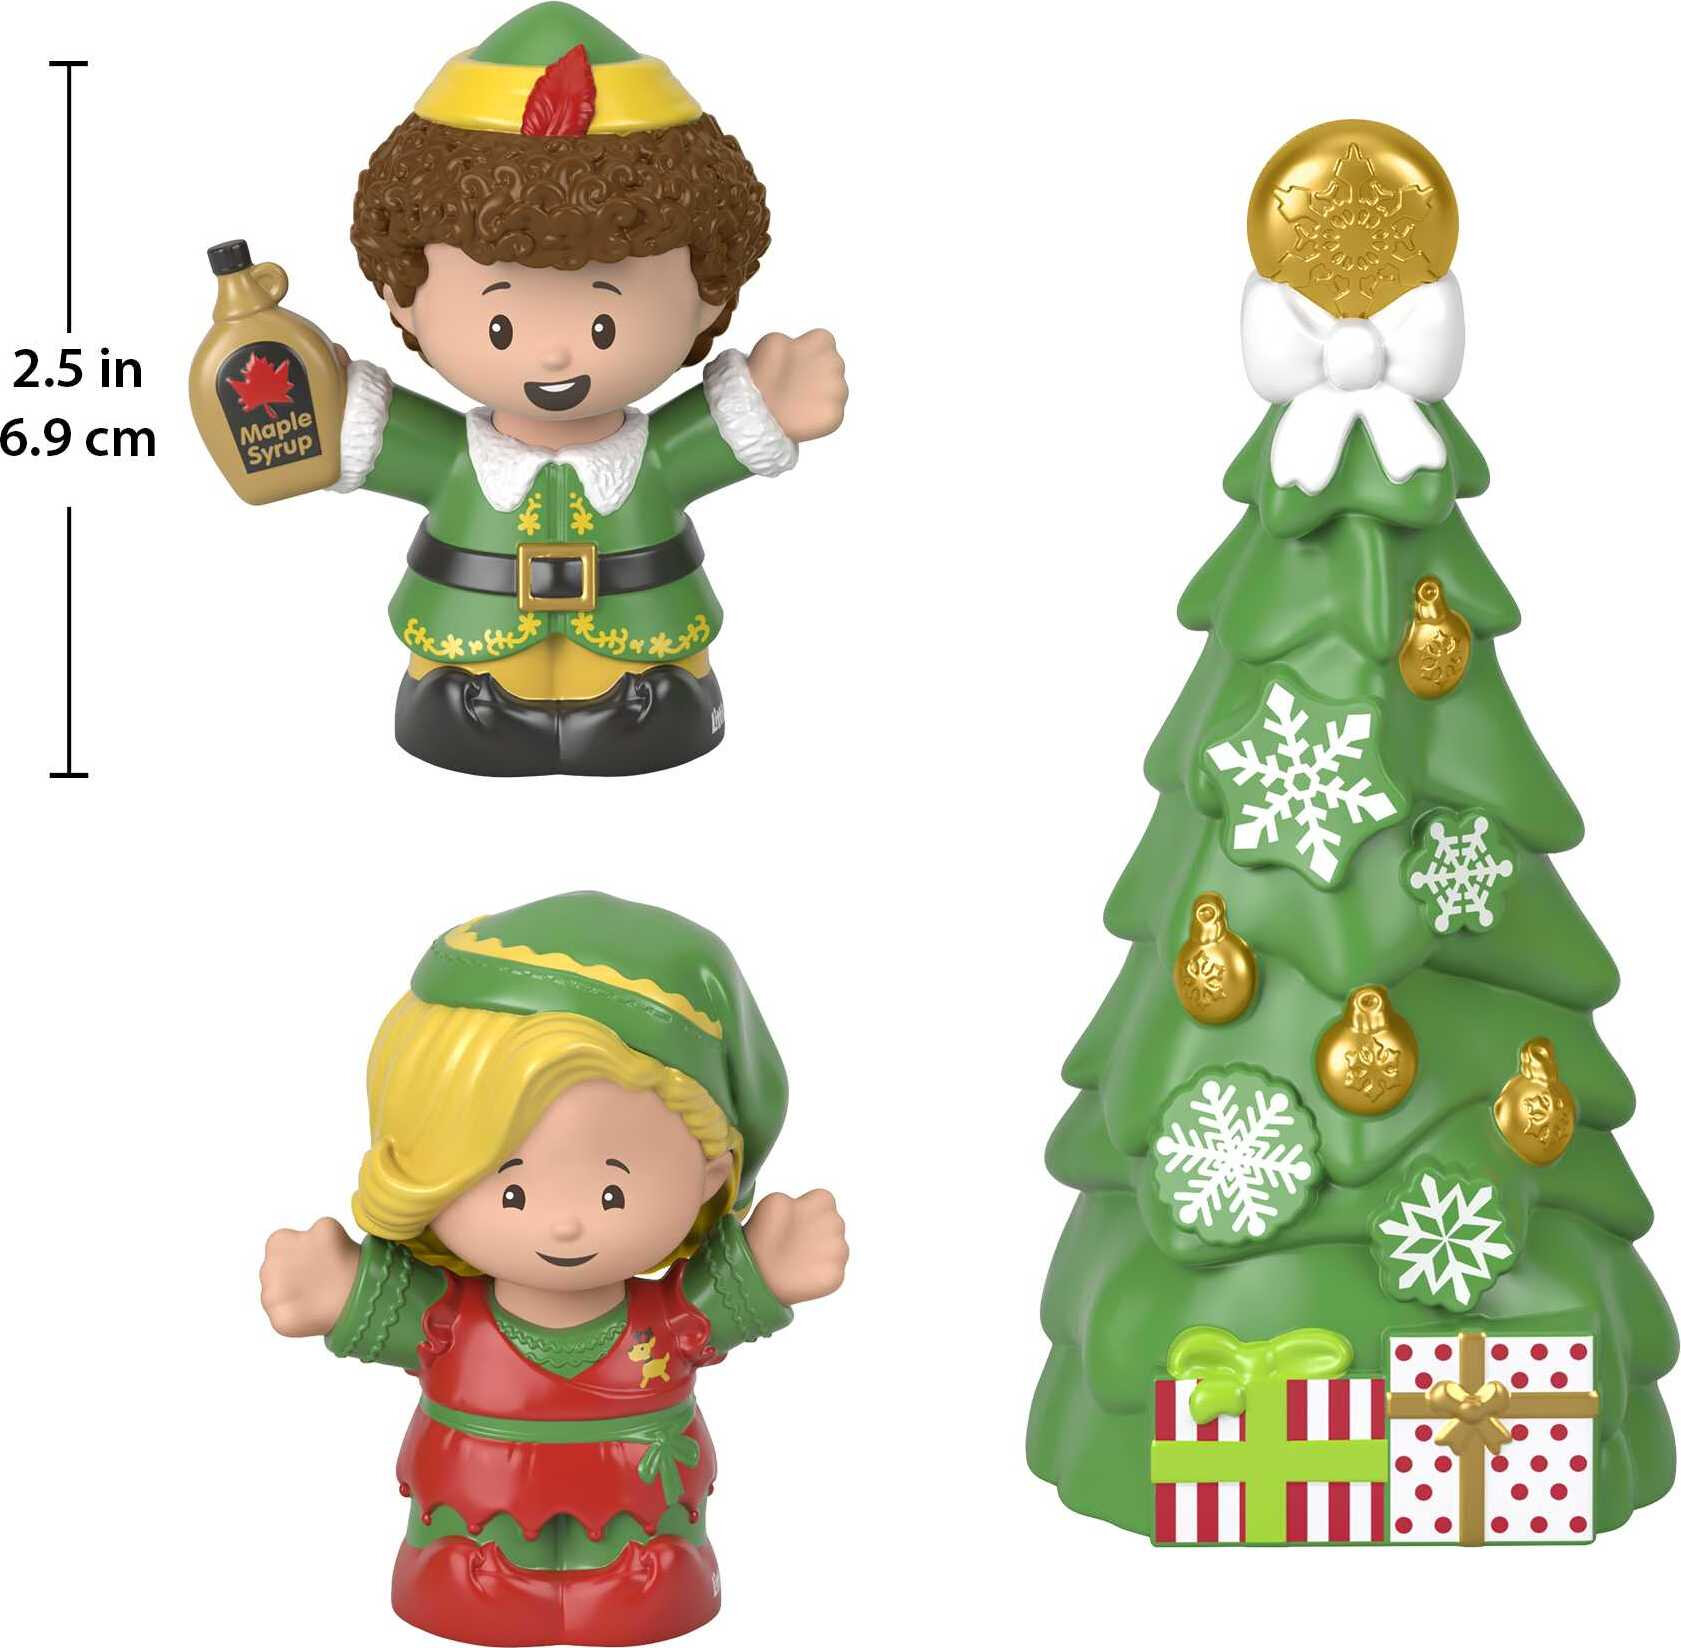 Little People Collector Elf Movie Special Edition Figure Set in Christmas Box for Adults & Fans - image 4 of 7